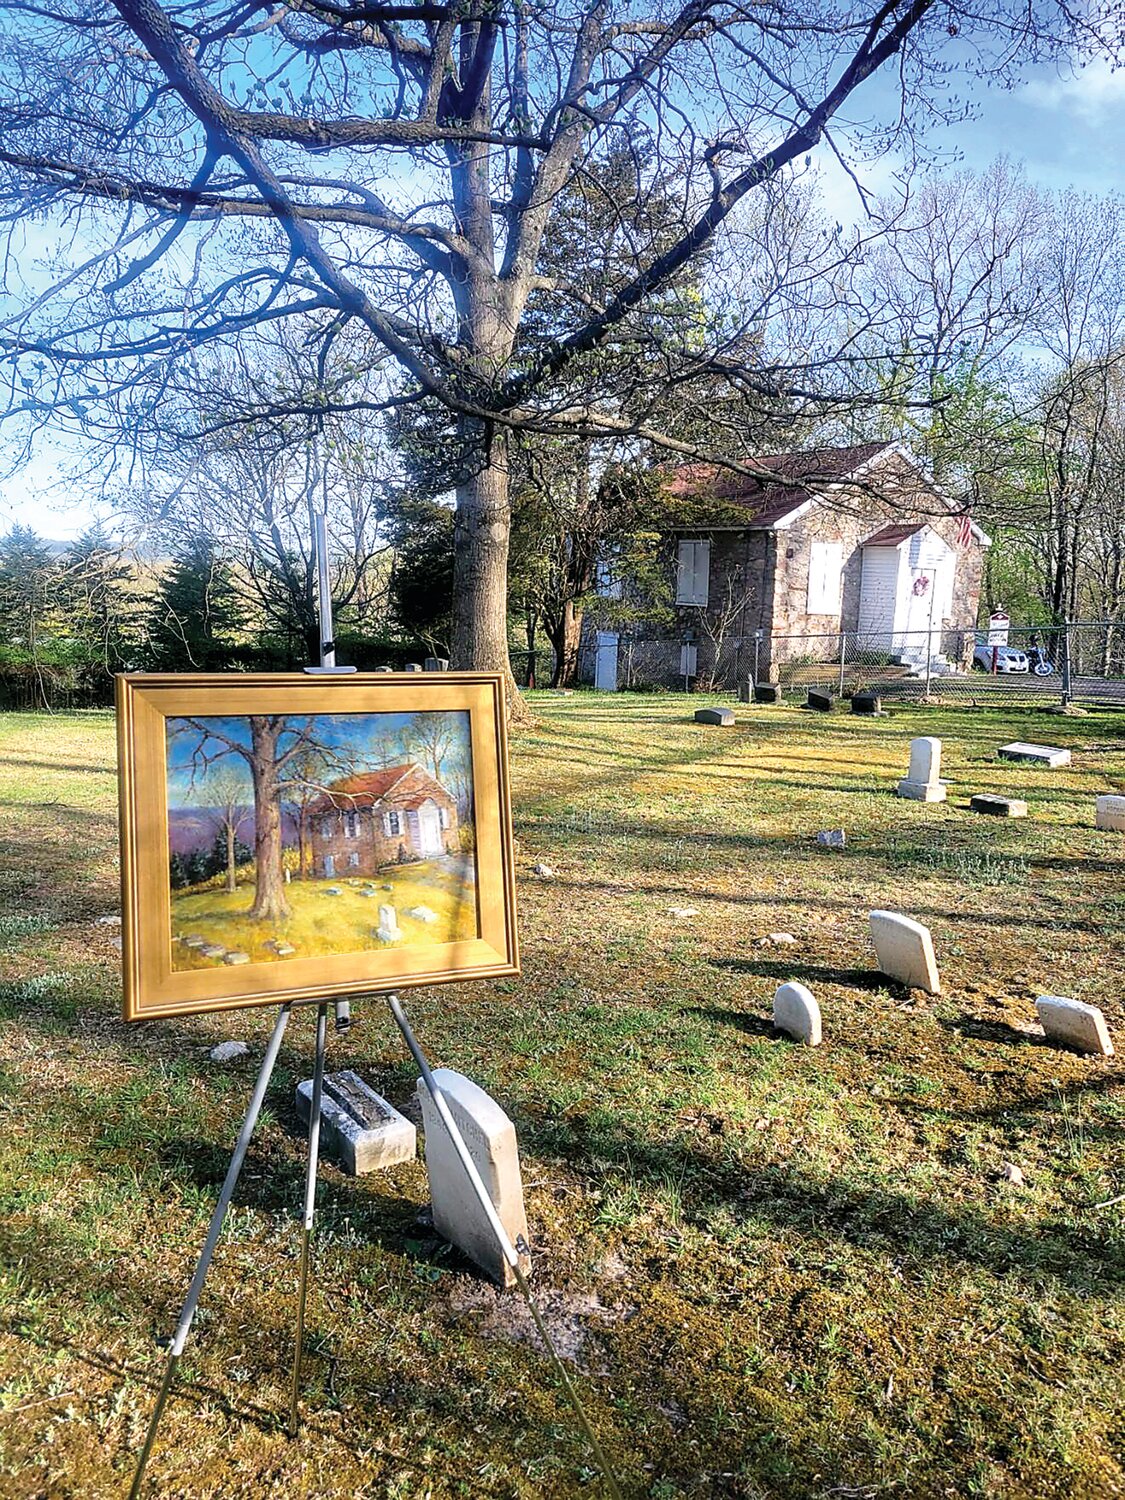 A painting of Mount Gilead, with the church in the background, as seen from artist Jim Lukens’ vantage point.